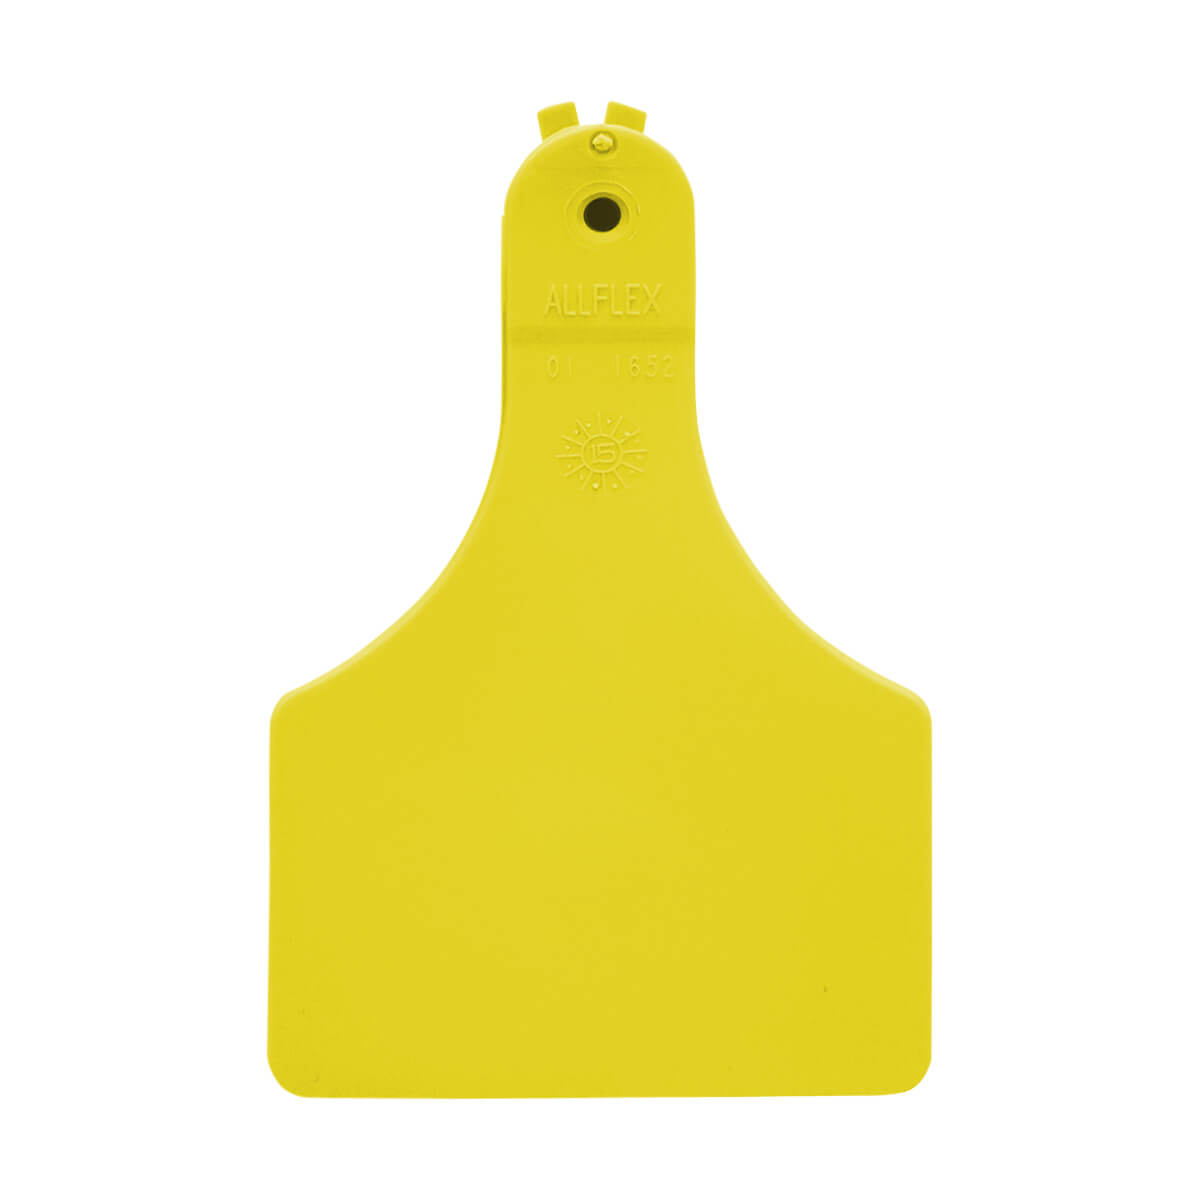 ATag One-Piece Calf Tag - Yellow - 25 Pack